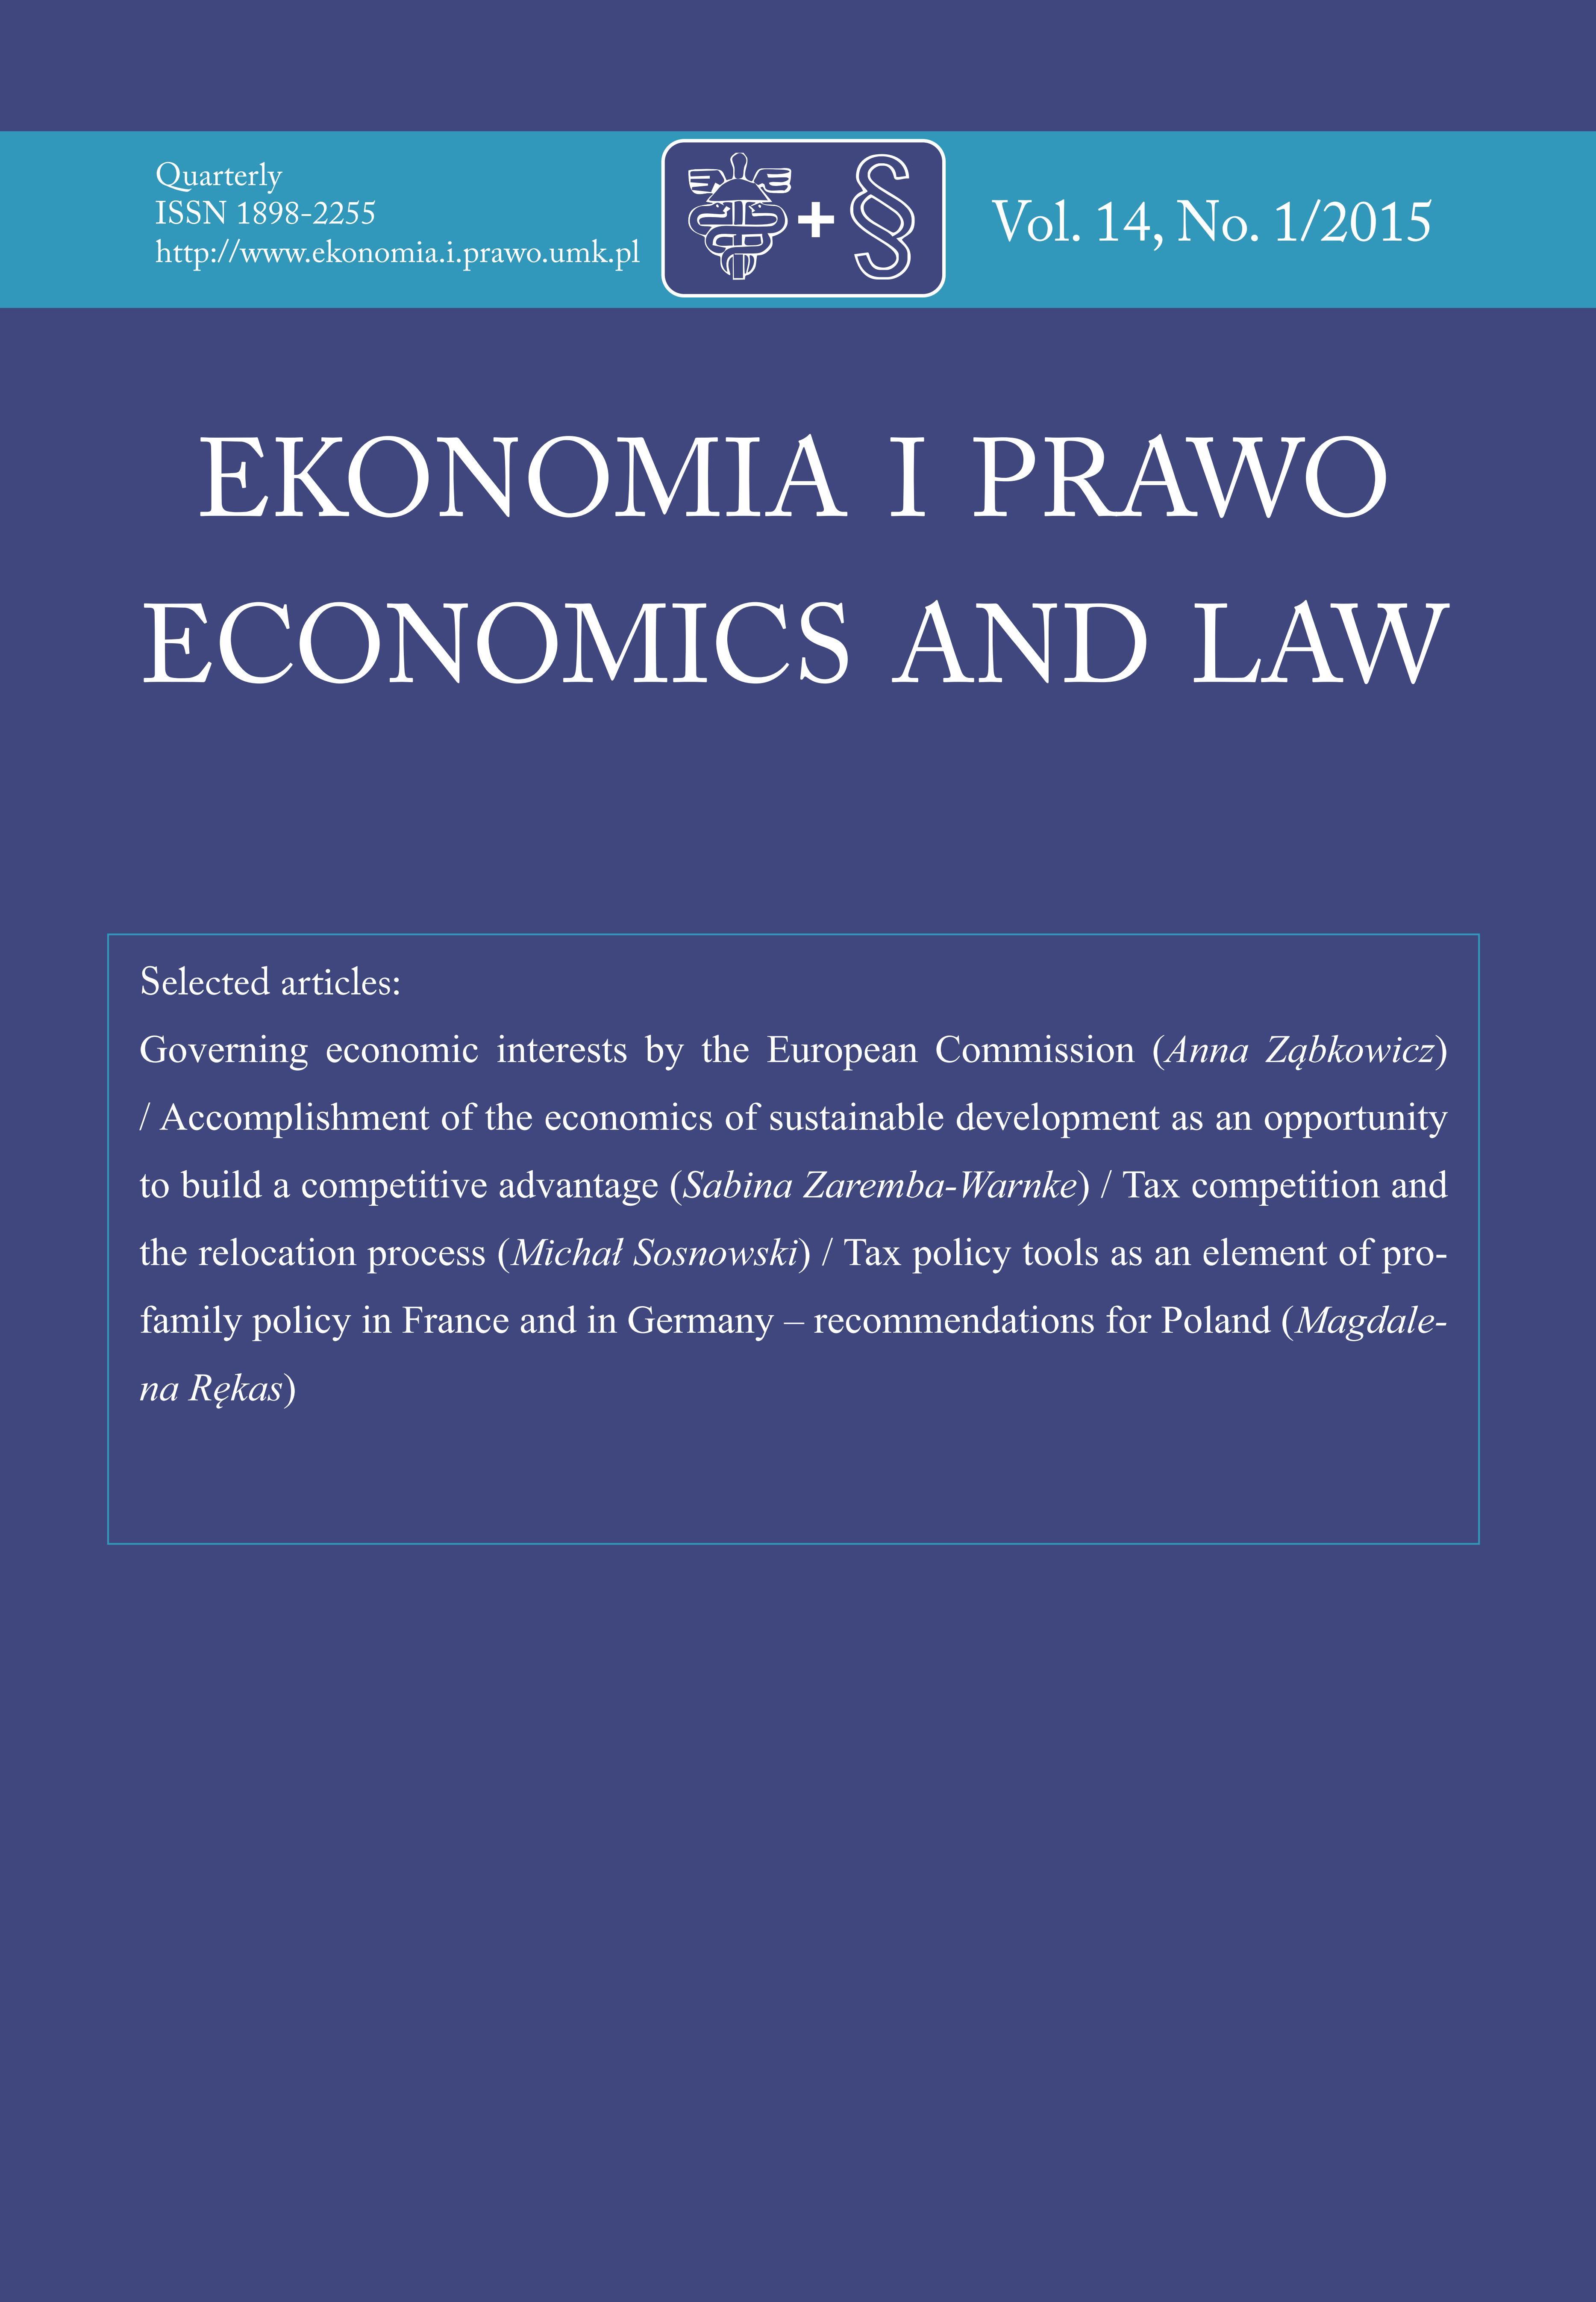 TAX POLICY TOOLS AS AN ELEMENT OF PRO-FAMILY POLICY IN FRANCE AND IN GERMANY – RECOMMENDATIONS FOR POLAND Cover Image